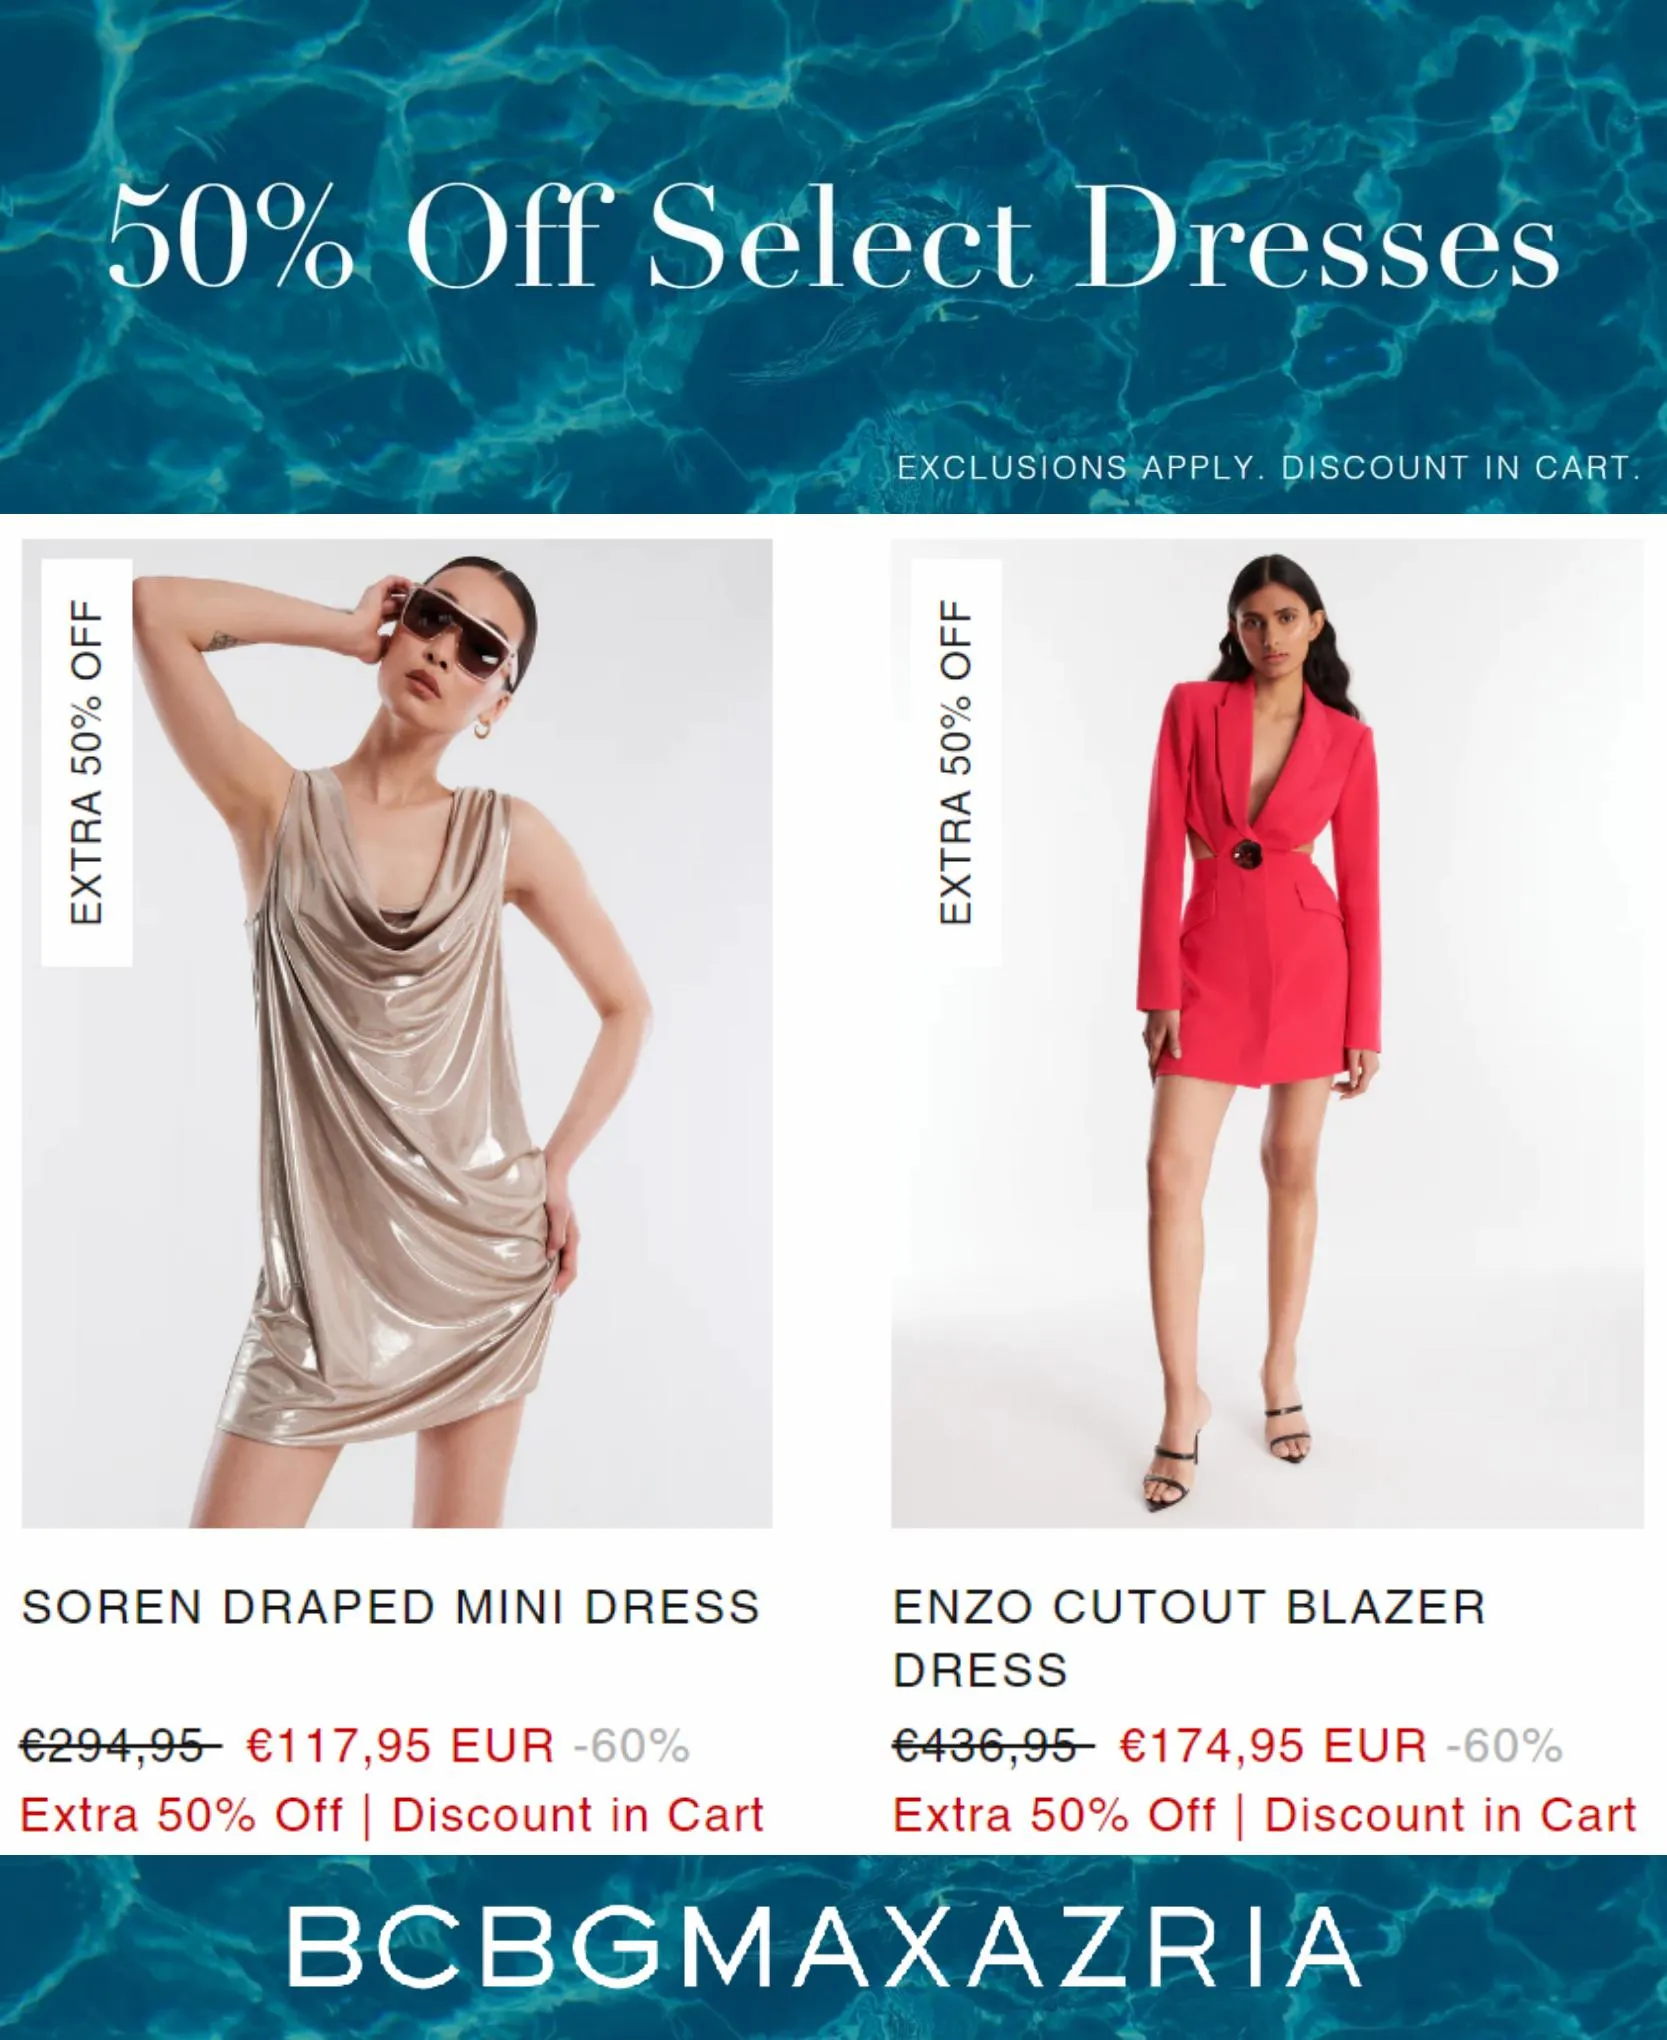 Catalogue 50% Off Select Dresses, page 00007